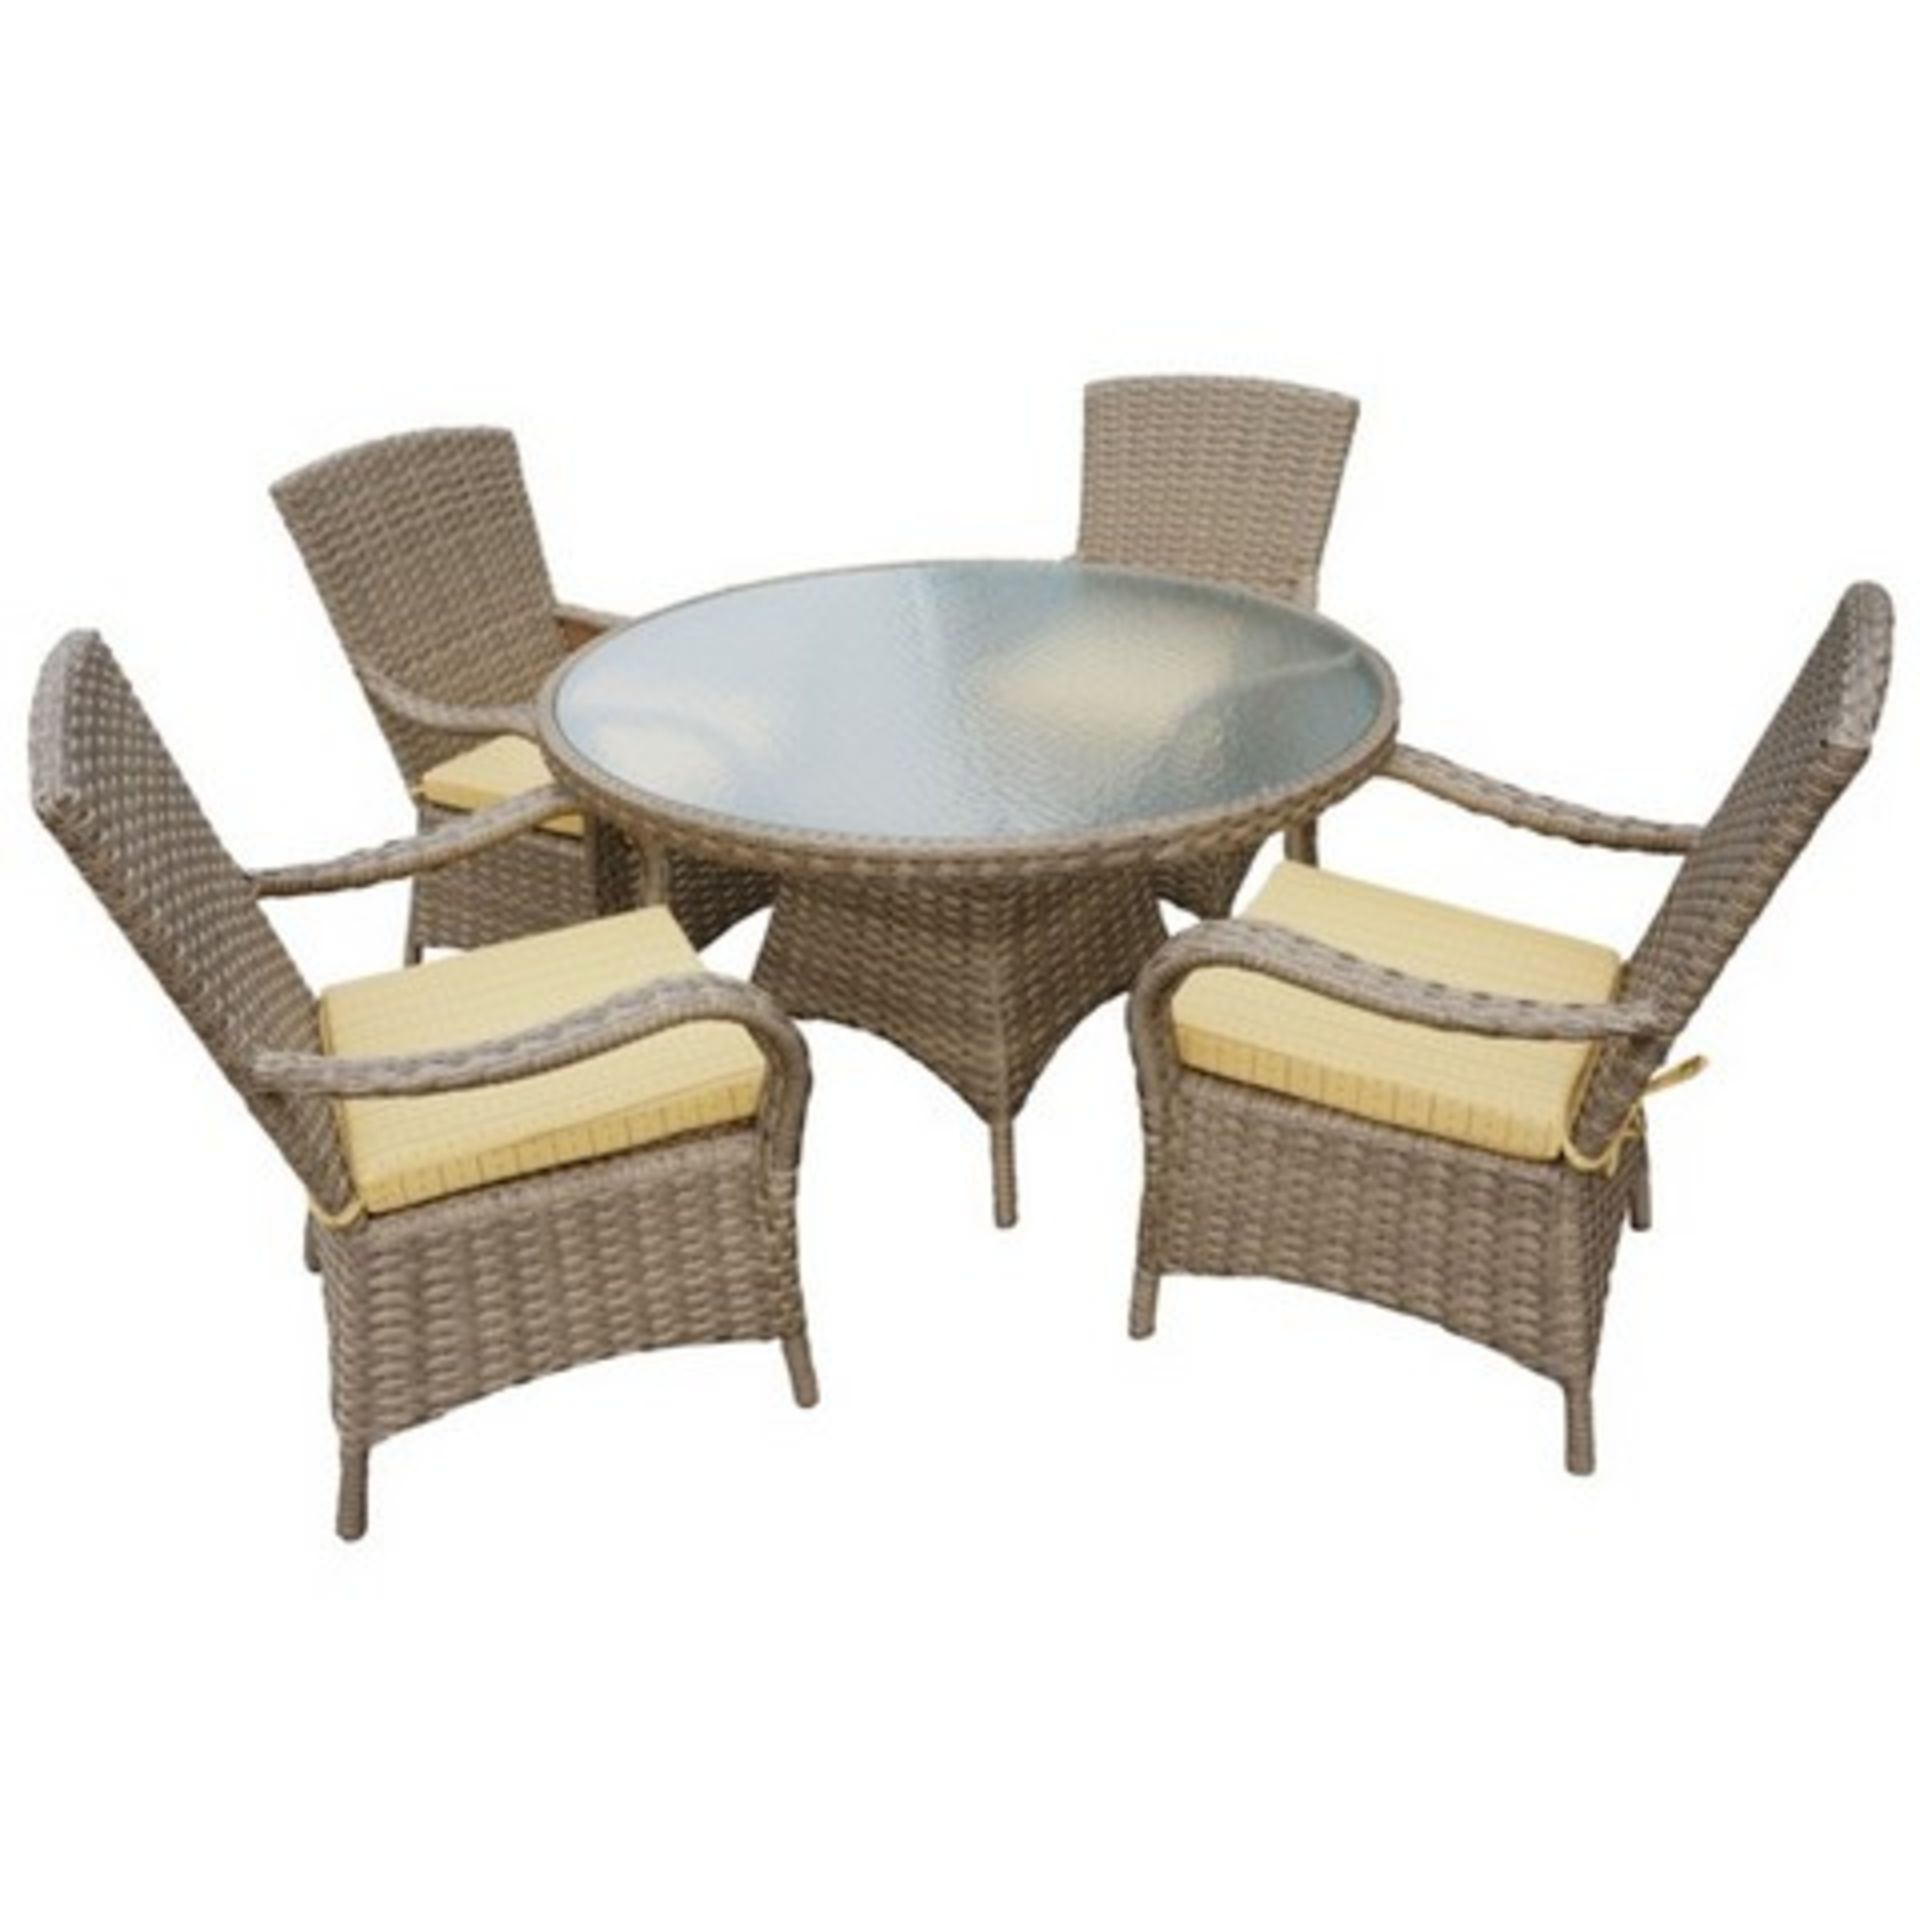 V Brand New BEIGE RATTAN ROUND 120CM TABLE SET WITH 4 CHAIRS & LUXURY OUTDOOR PERFORMANCE CUSHIONS